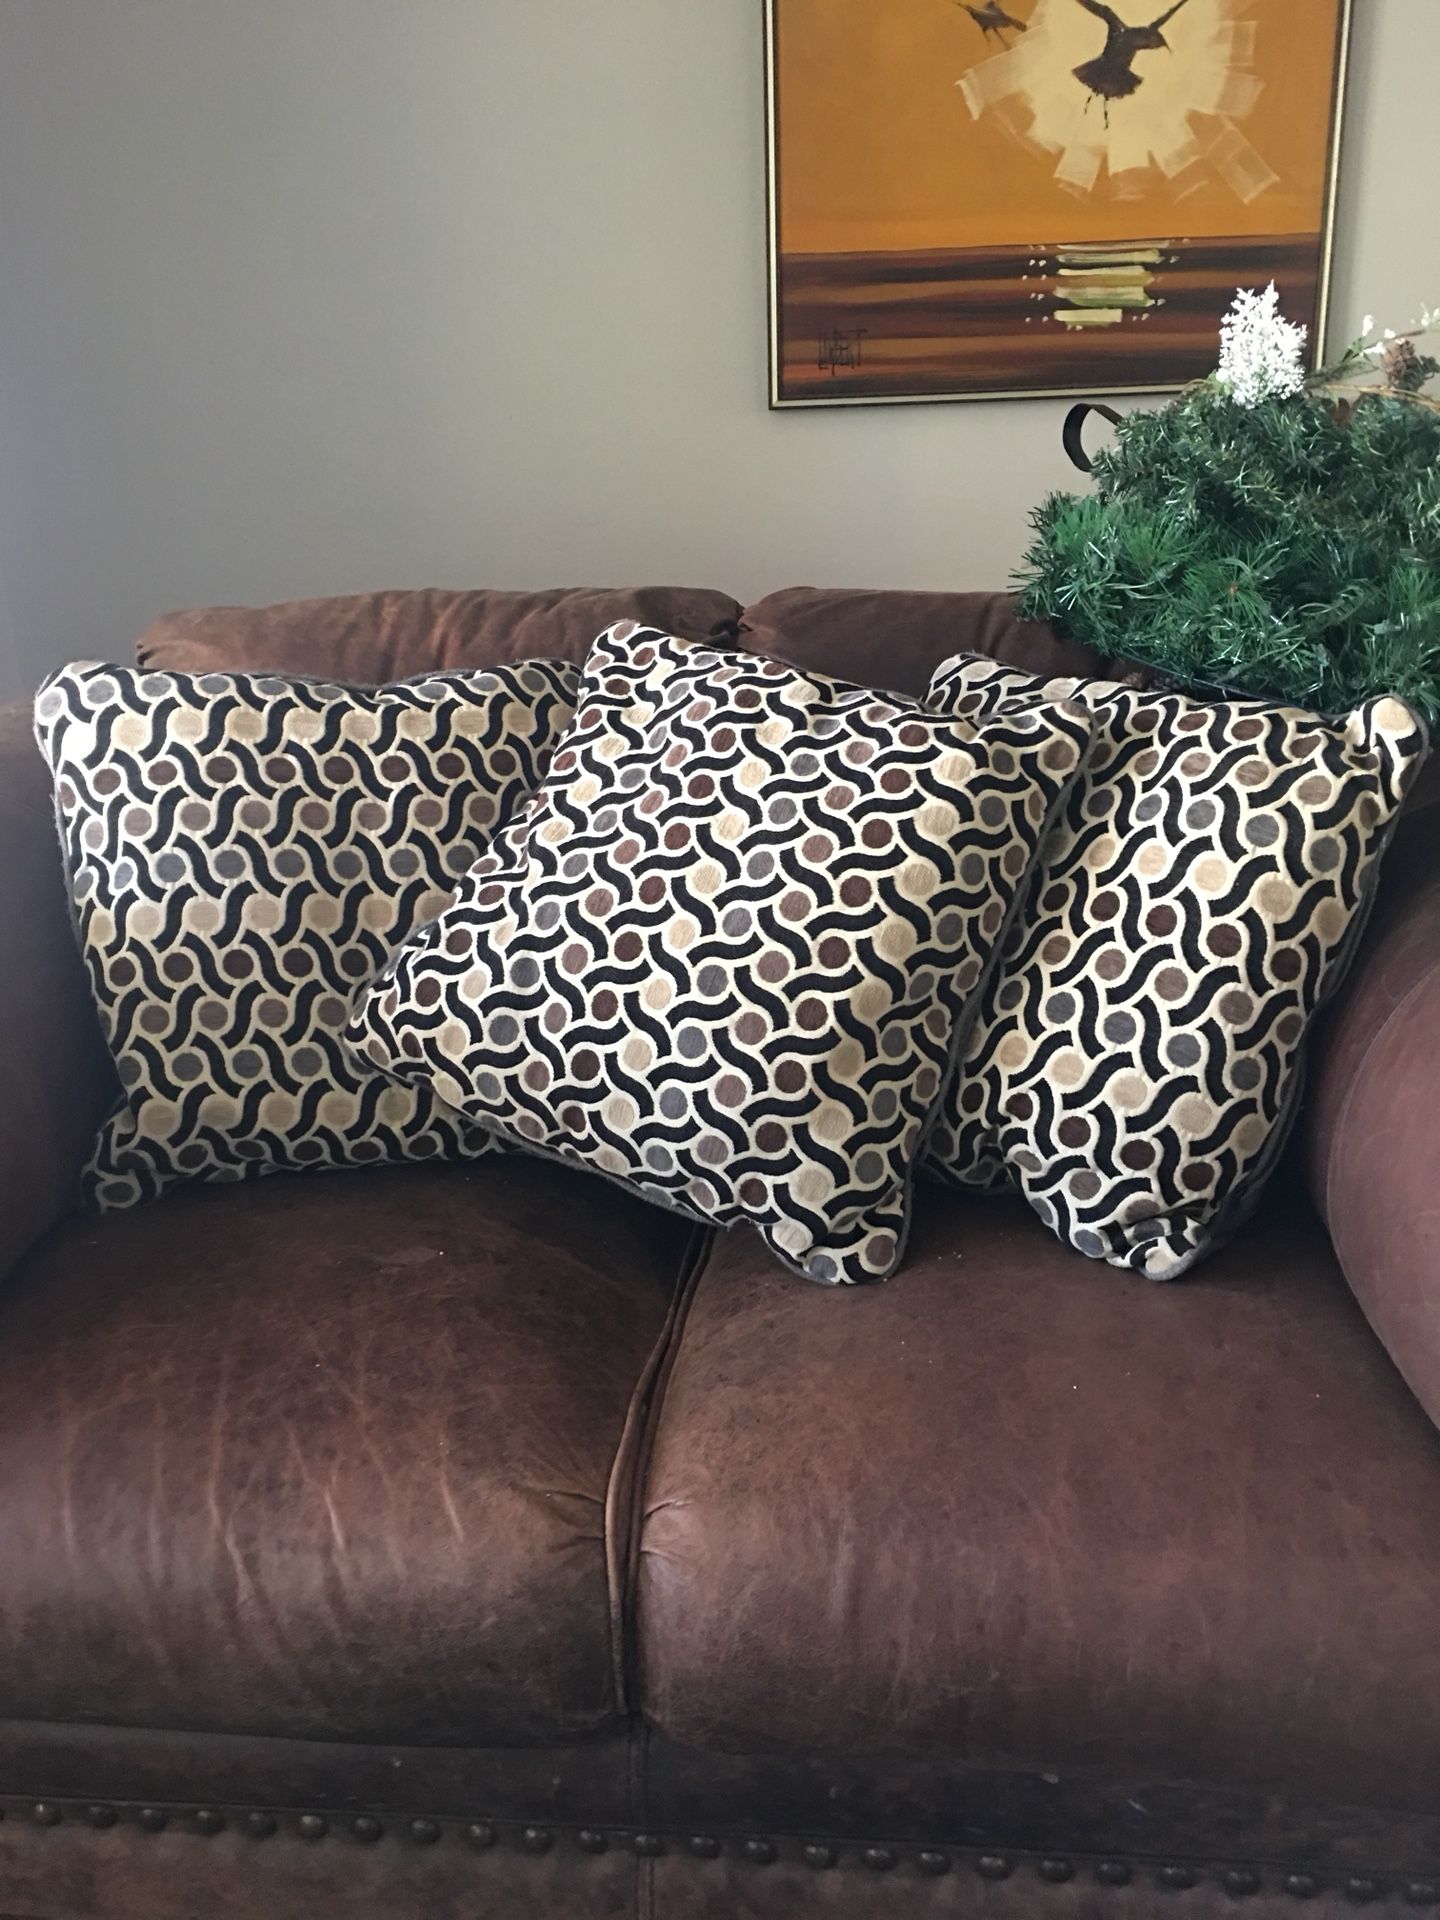 Throw pillows from Ashley Furniture